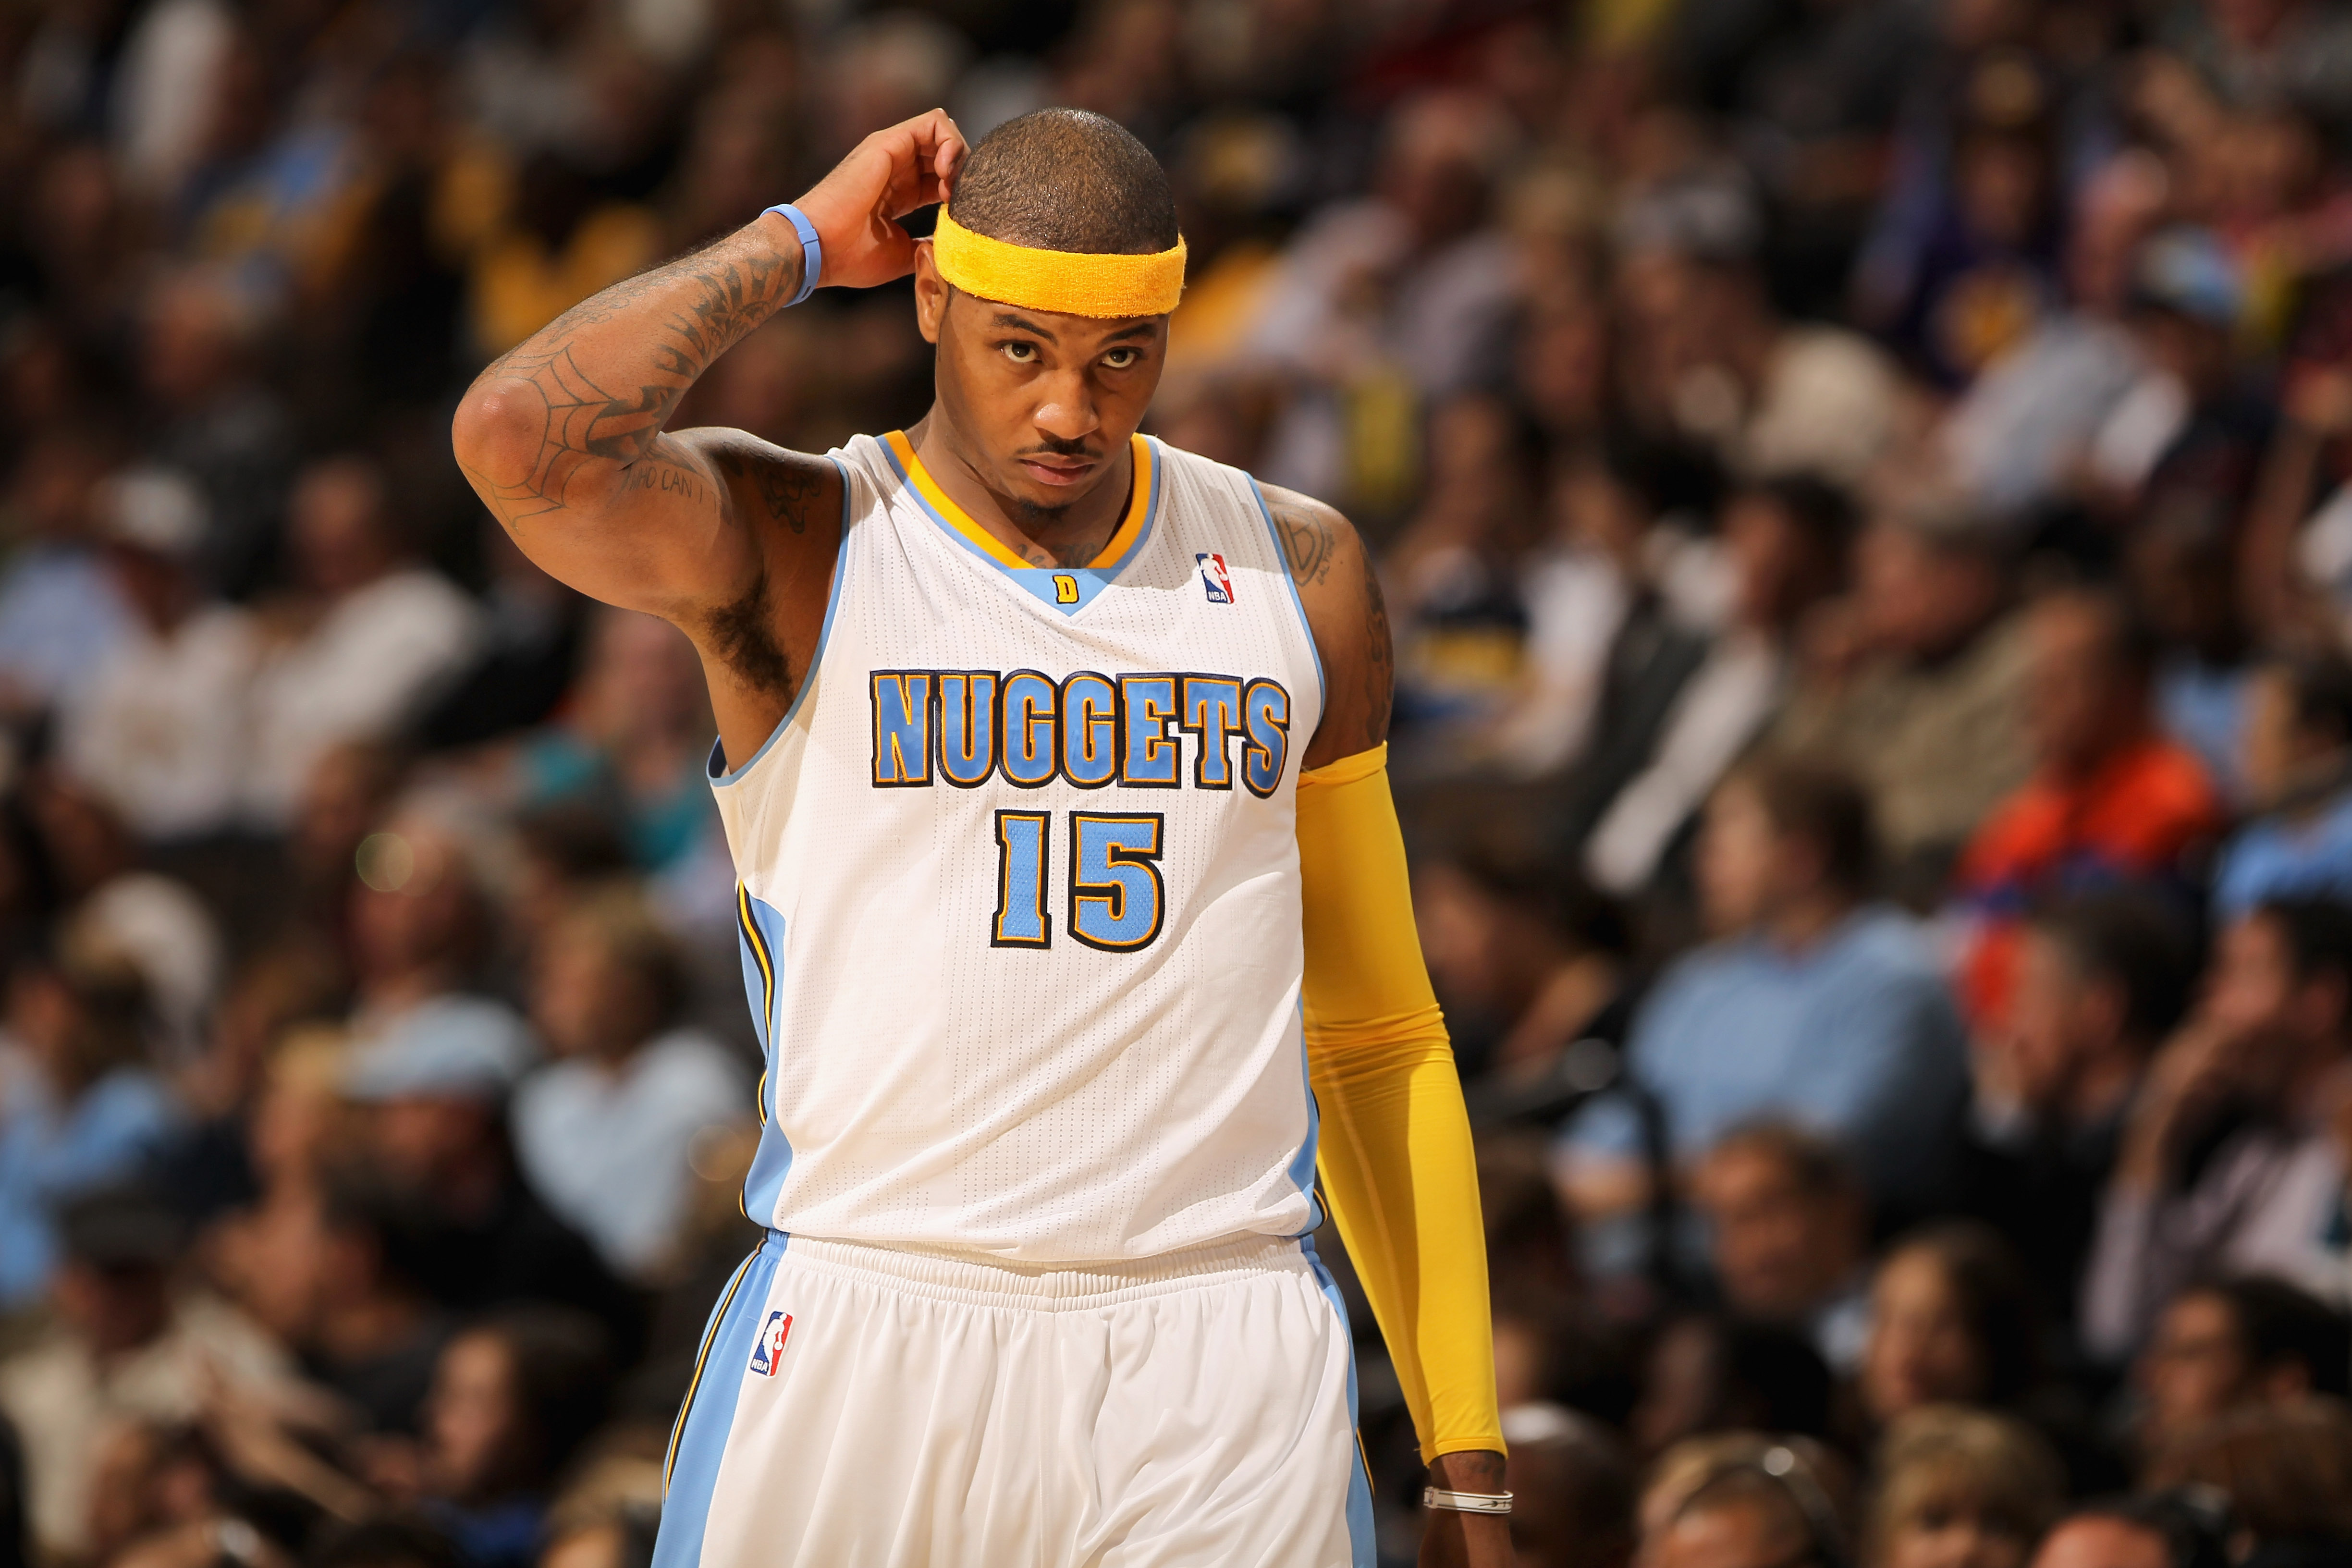 DENVER - NOVEMBER 11:  Carmelo Anthony #15 of the Denver Nuggets looks on during a break in the action against the Los Angeles Lakers at the Pepsi Center on November 11, 2010 in Denver, Colorado. The Nuggets defeated the Lakers 118-112.  NOTE TO USER: Use